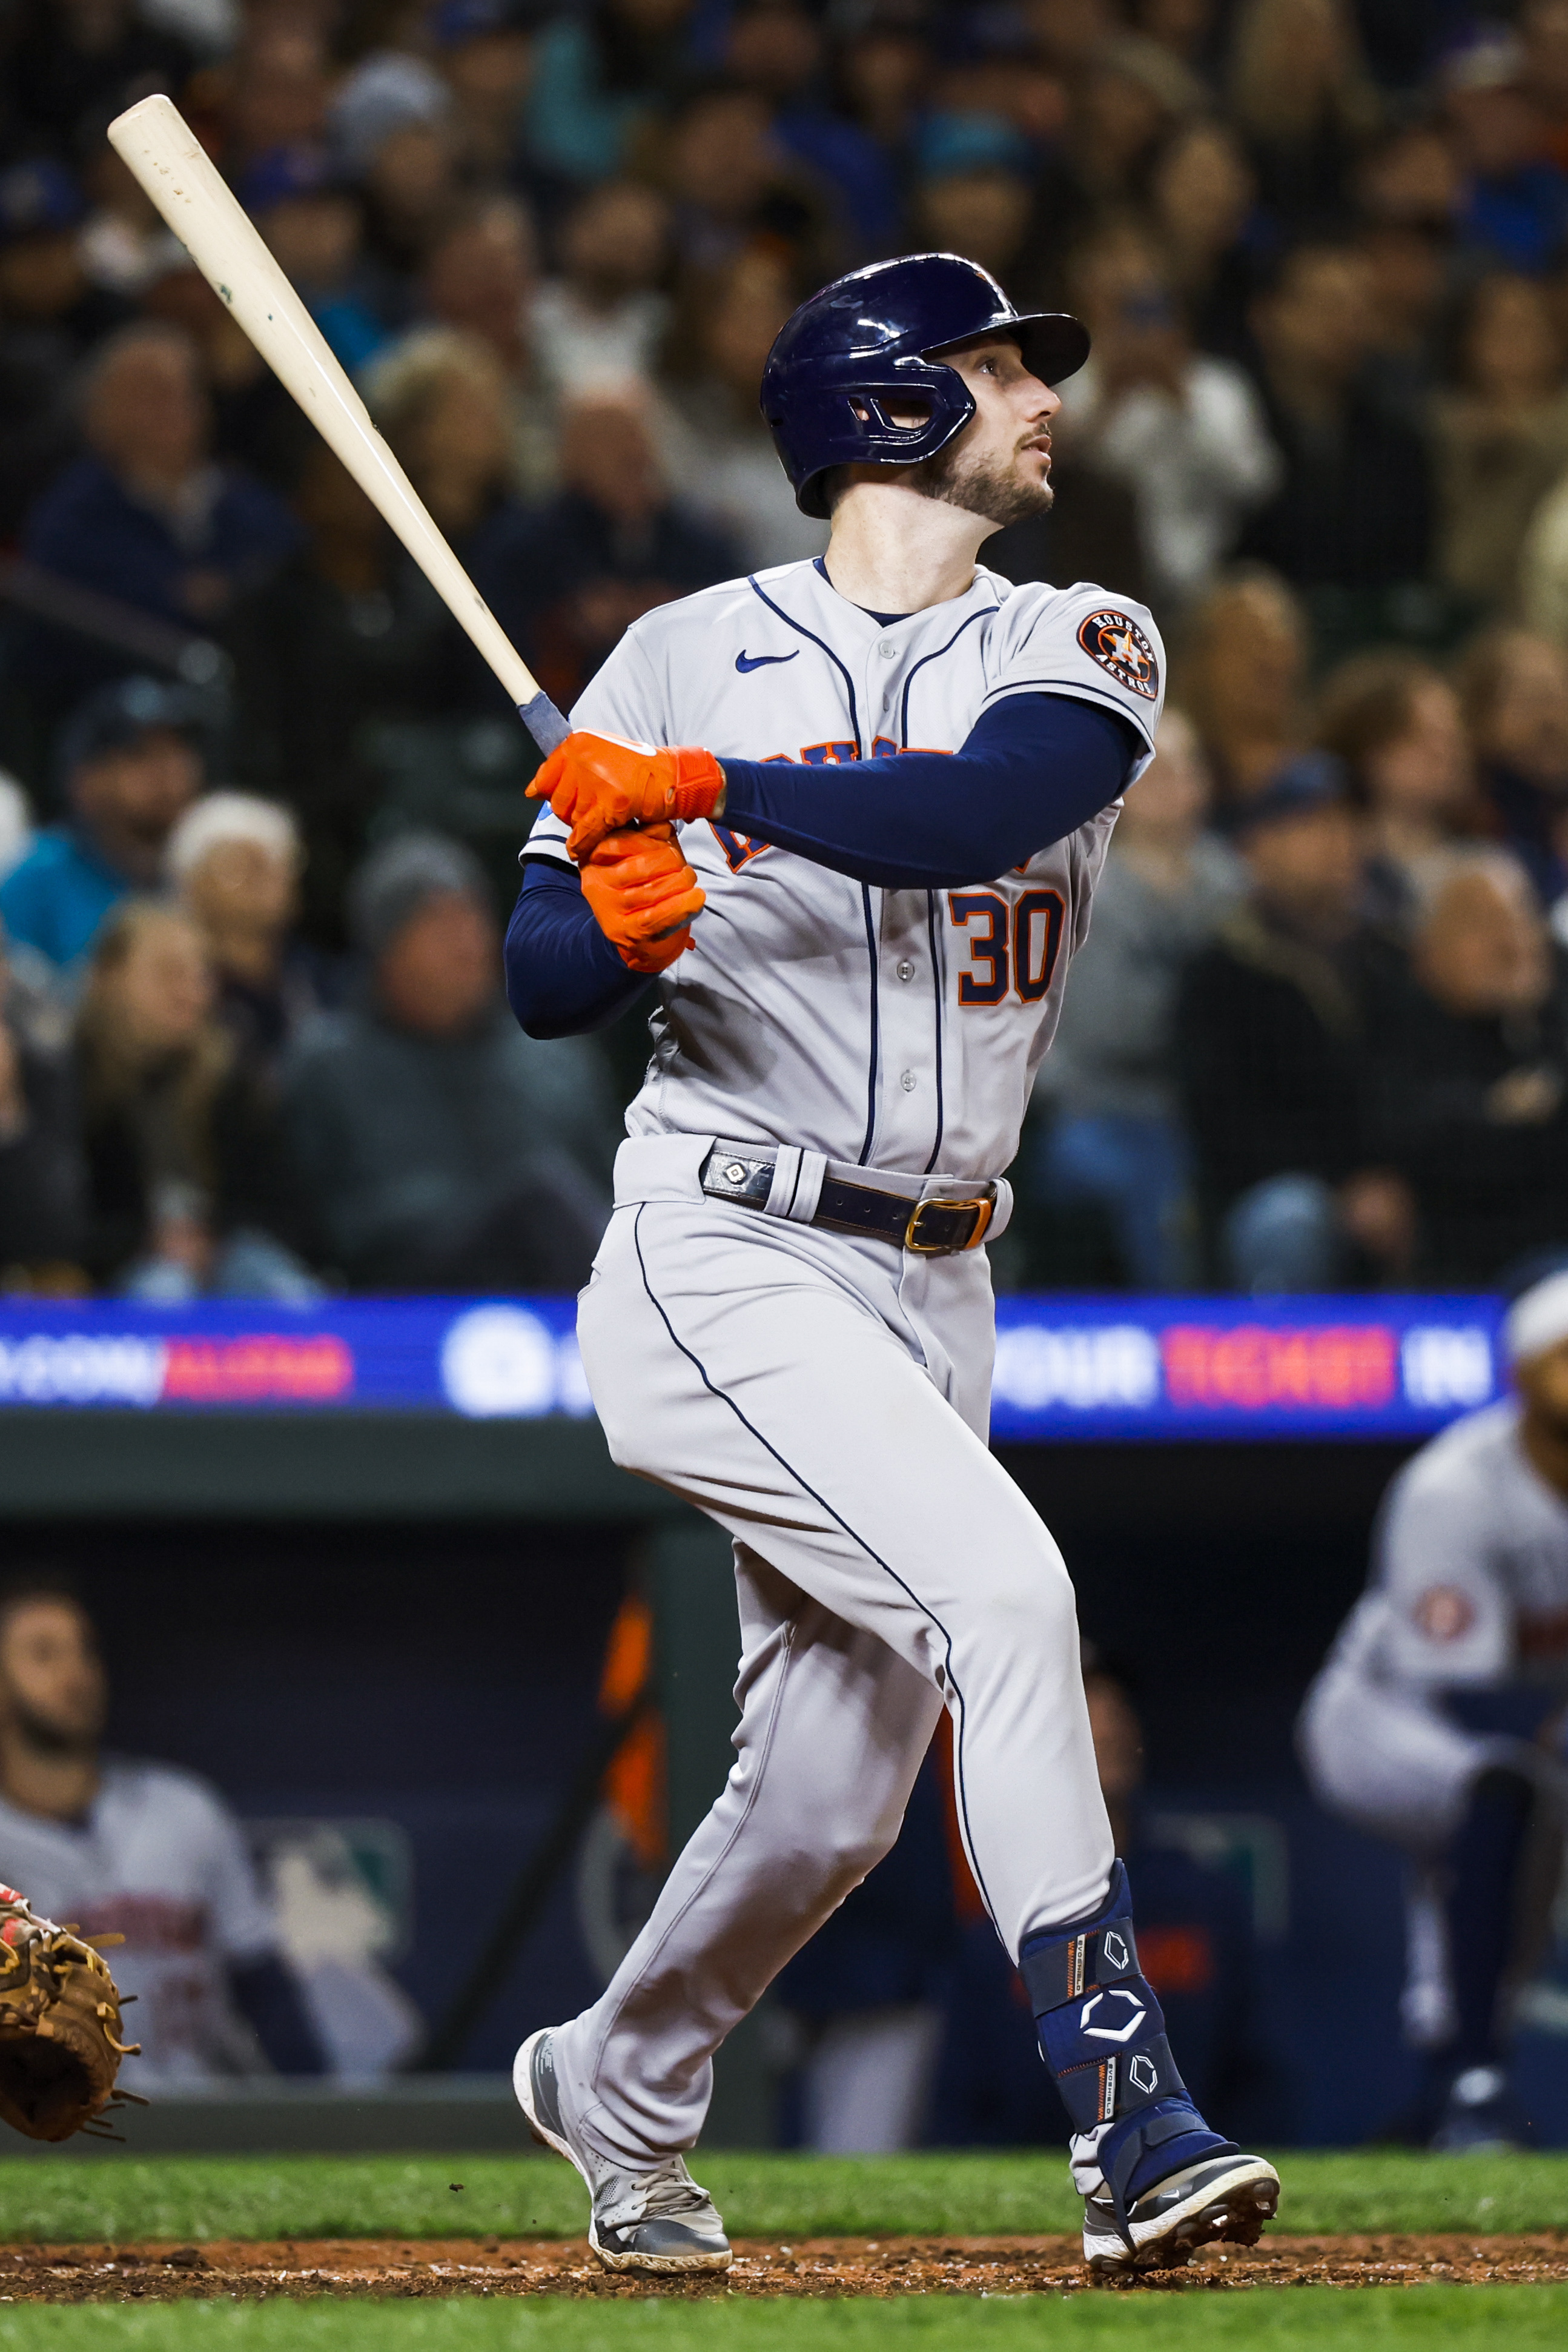 Kyle Tucker's late HR lifts Astros over Mariners